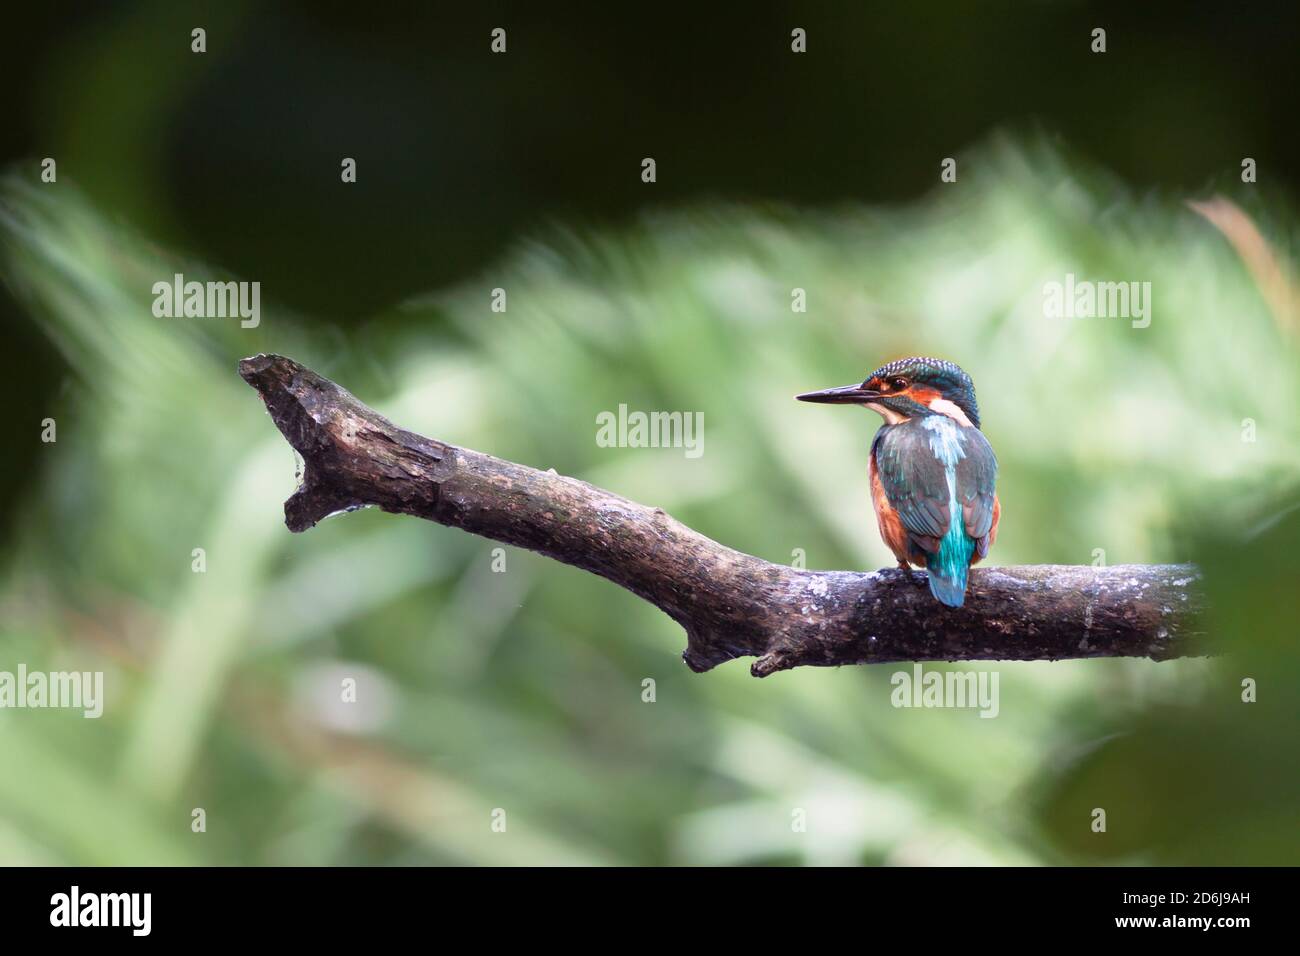 Common kingfisher (Alcedo atthis) sitting on a branch. Stock Photo